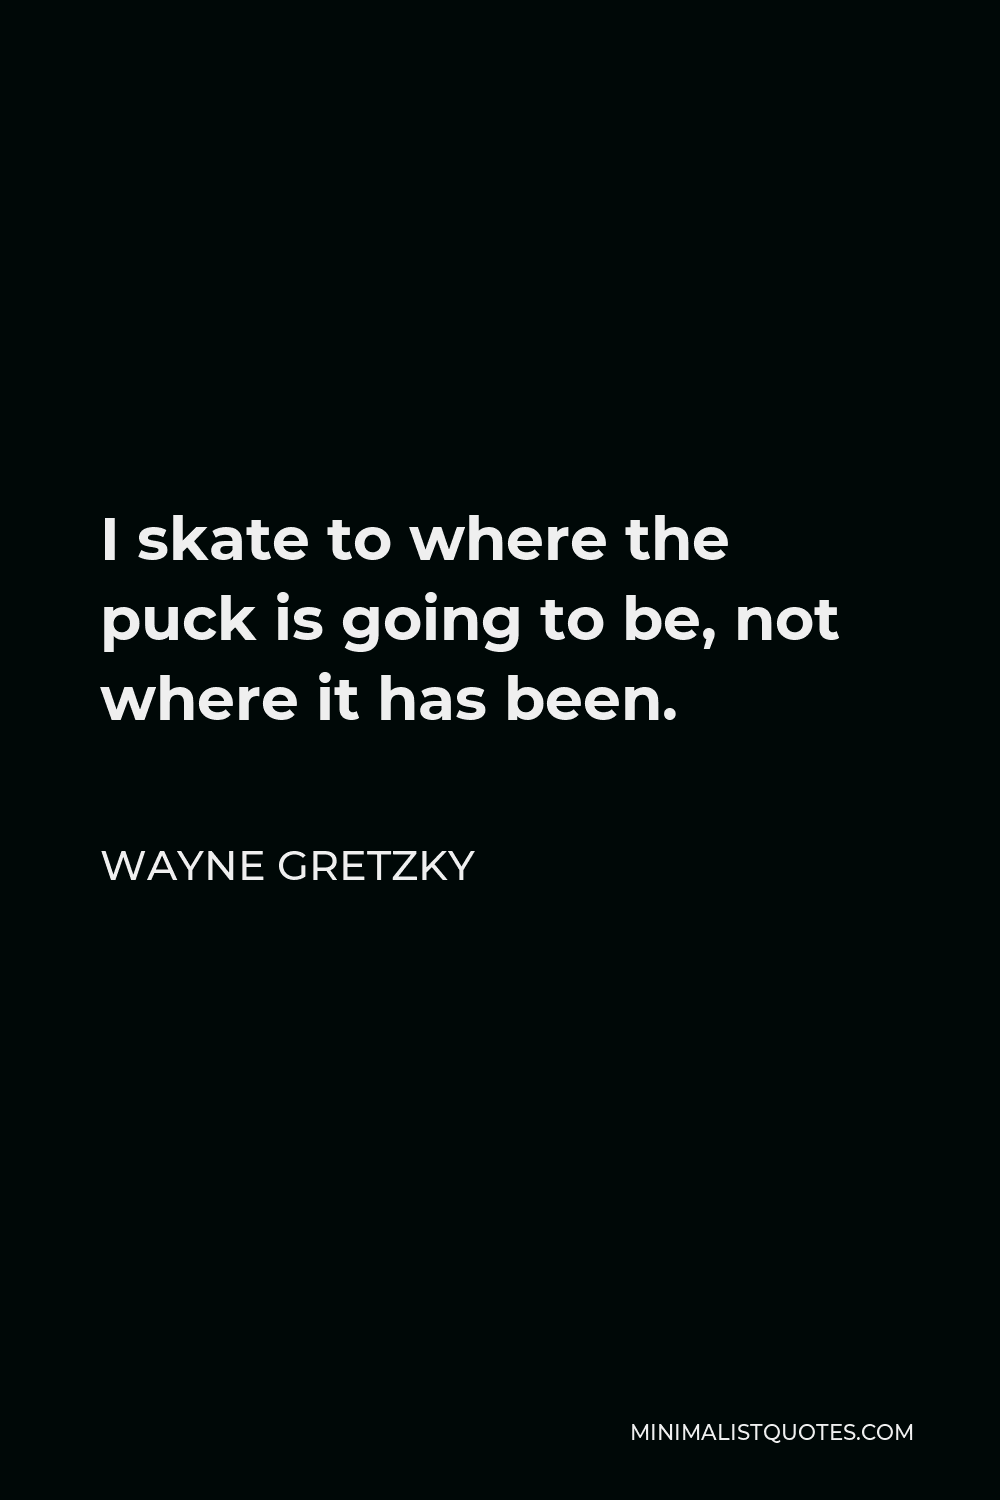 Wayne Gretzky - I skate to where the puck is going to be